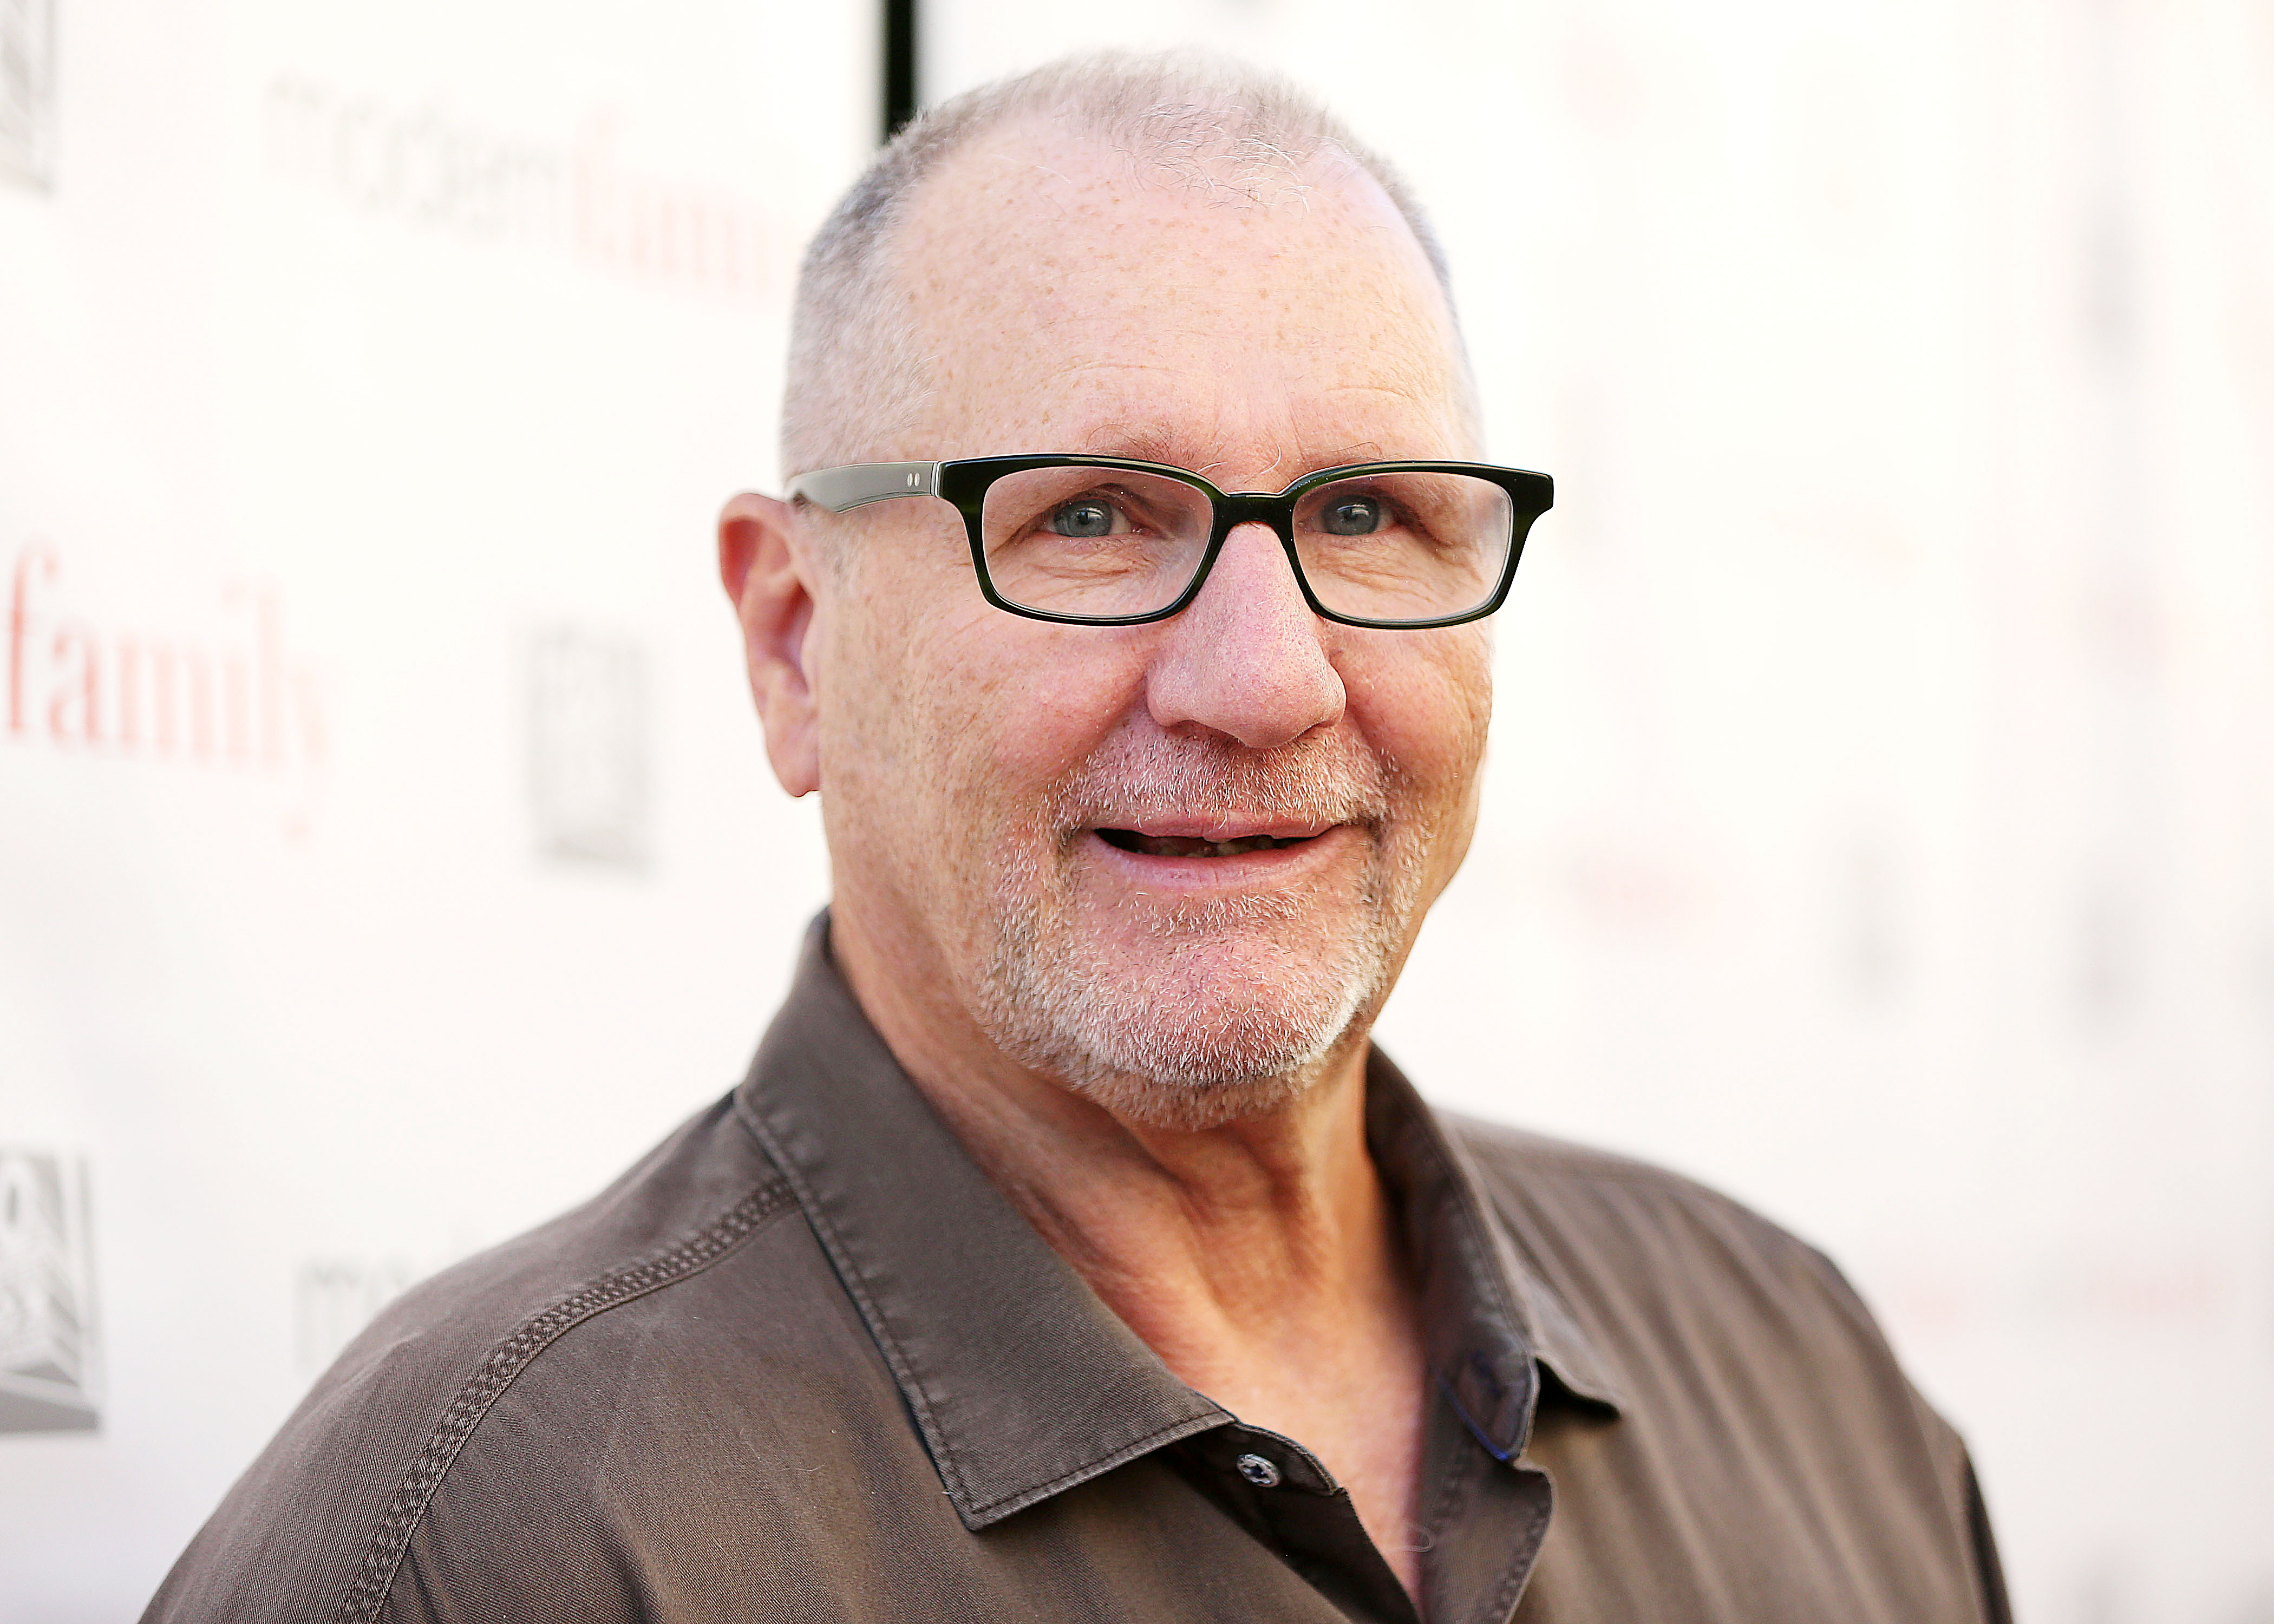 https://www.usmagazine.com/wp-content/uploads/2019/10/Ed-O-Neill-25-Things-You-Dont-Know-About-Me-01.jpg?quality=86&strip=all